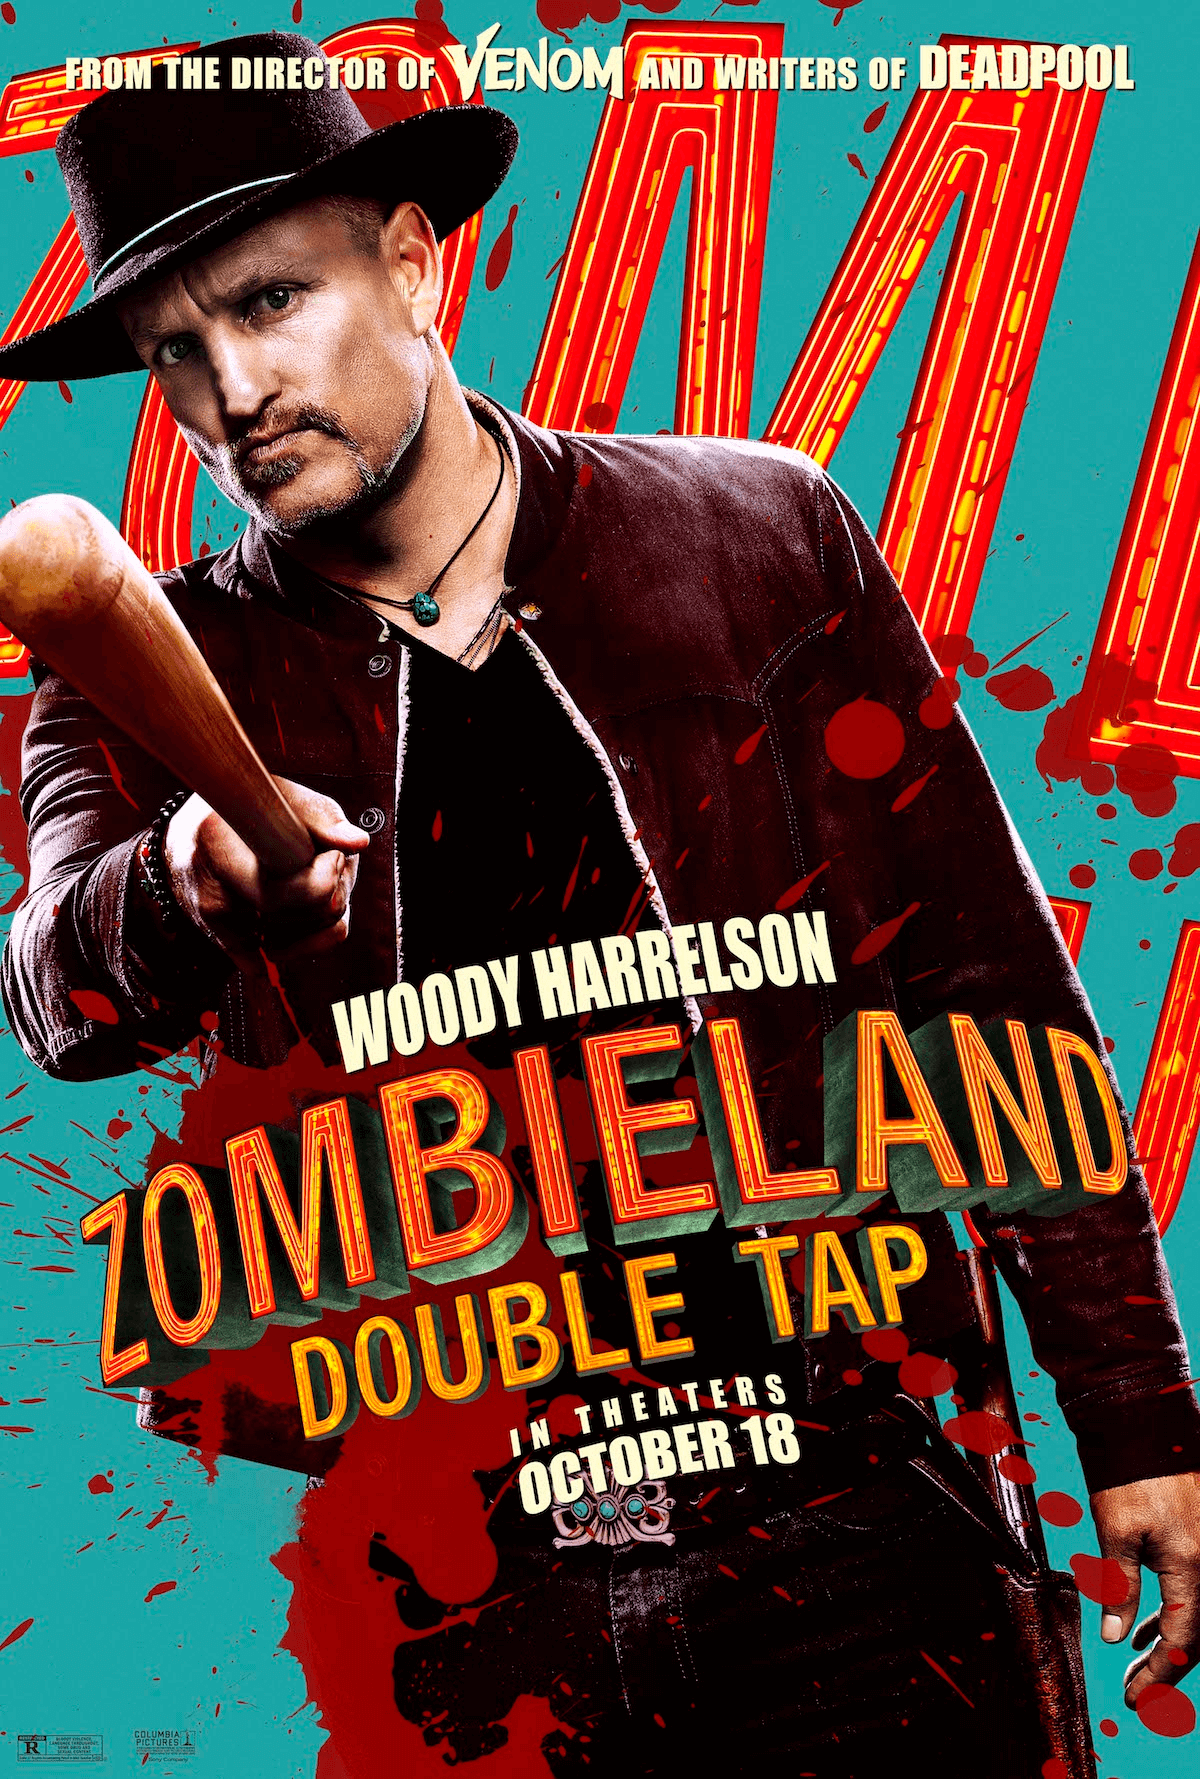 ZOMBIELAND 2 DOUBLE TAP FILM POSTER Movie Film Repro Poster Print